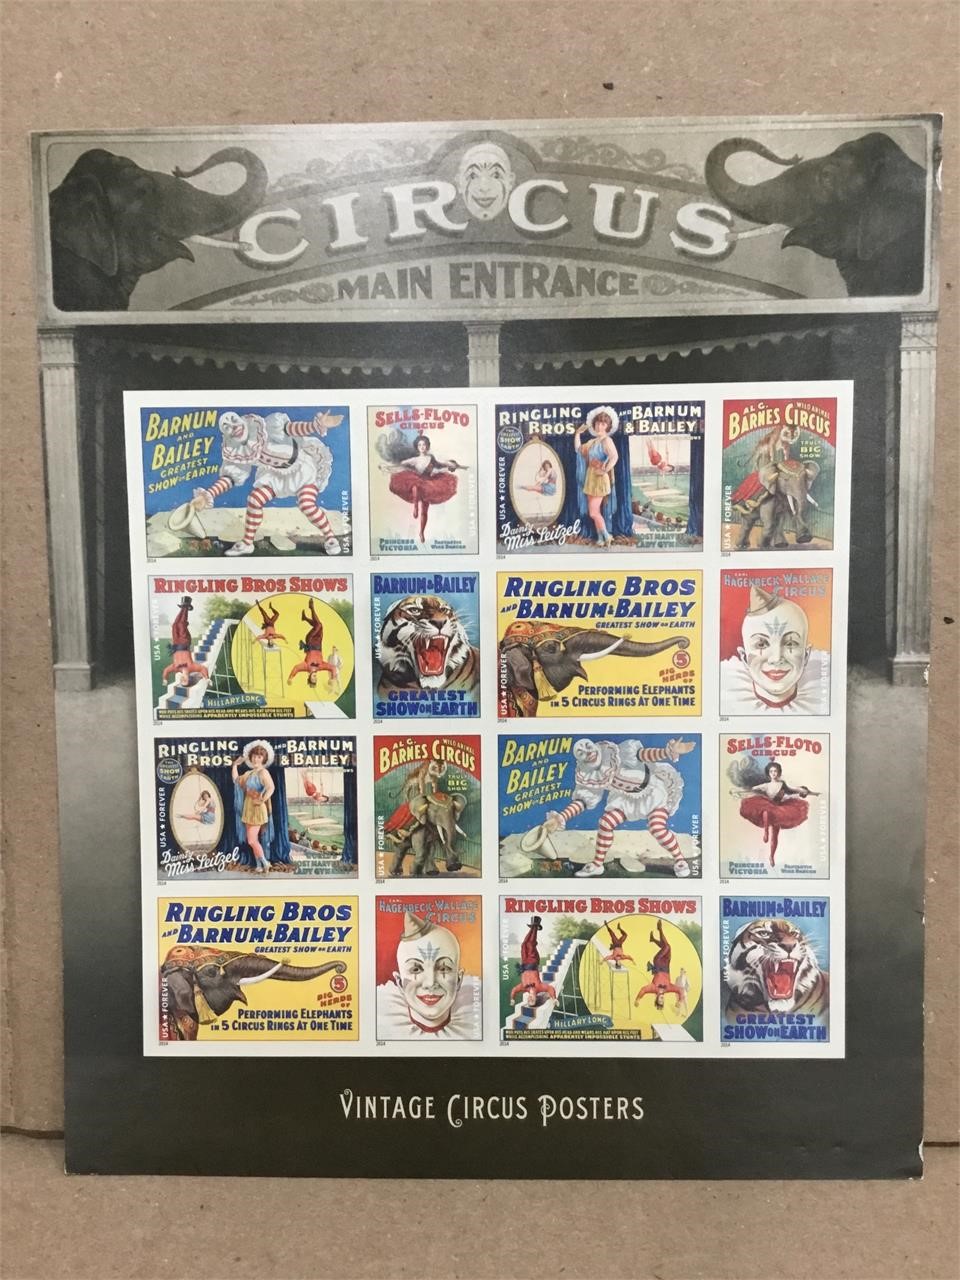 2014 Vintage Circus Posters 16 Stamps